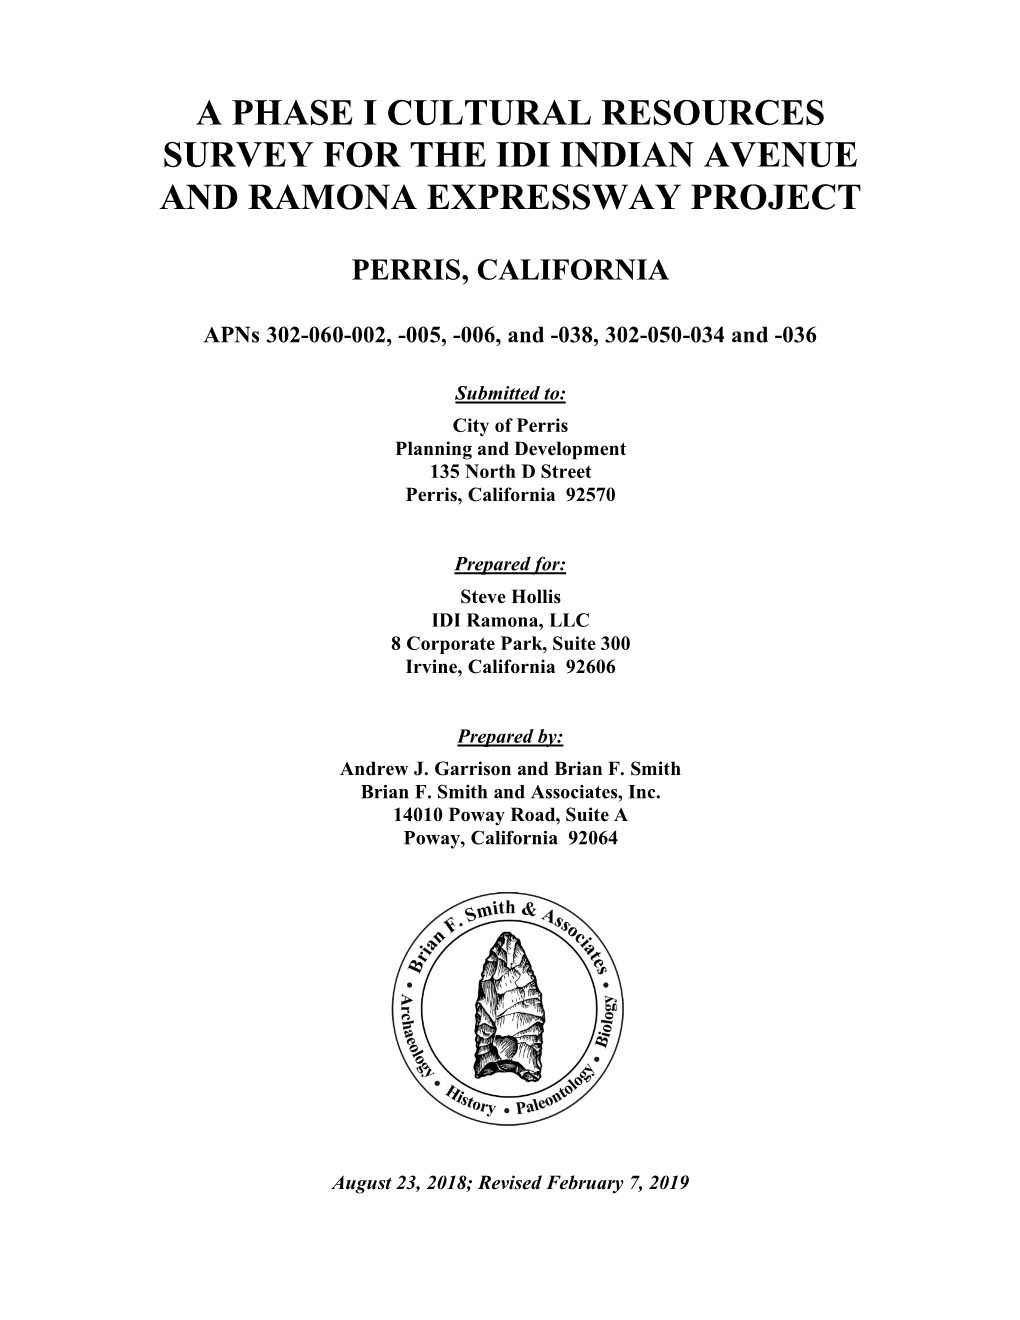 A Phase I Cultural Resources Survey for the Idi Indian Avenue and Ramona Expressway Project